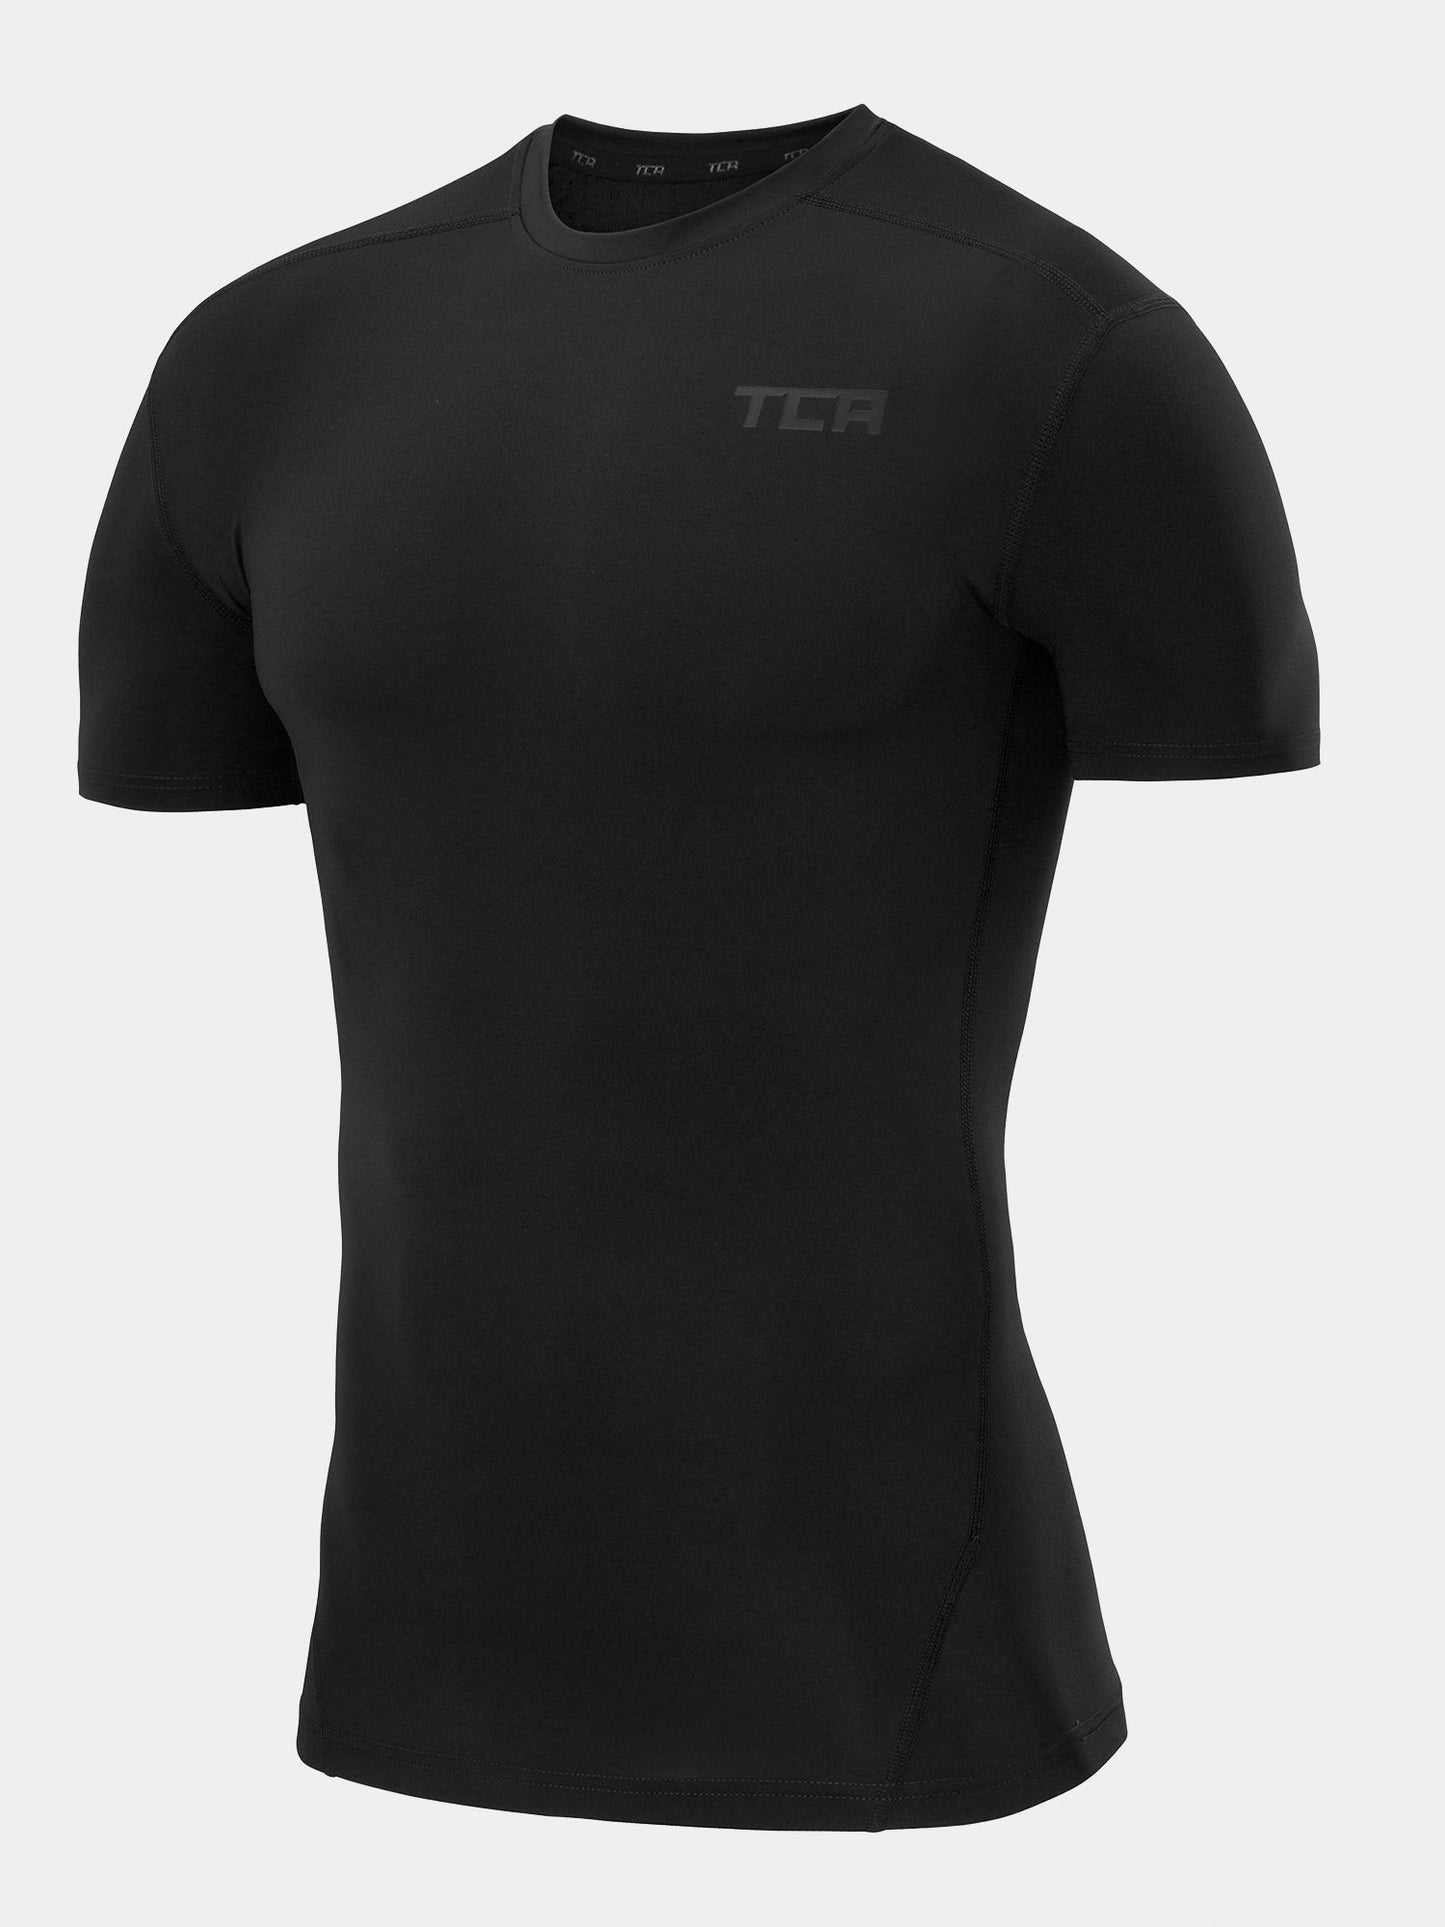 Pro Performance Compression Base Layer Short Sleeve Crew Neck For Men